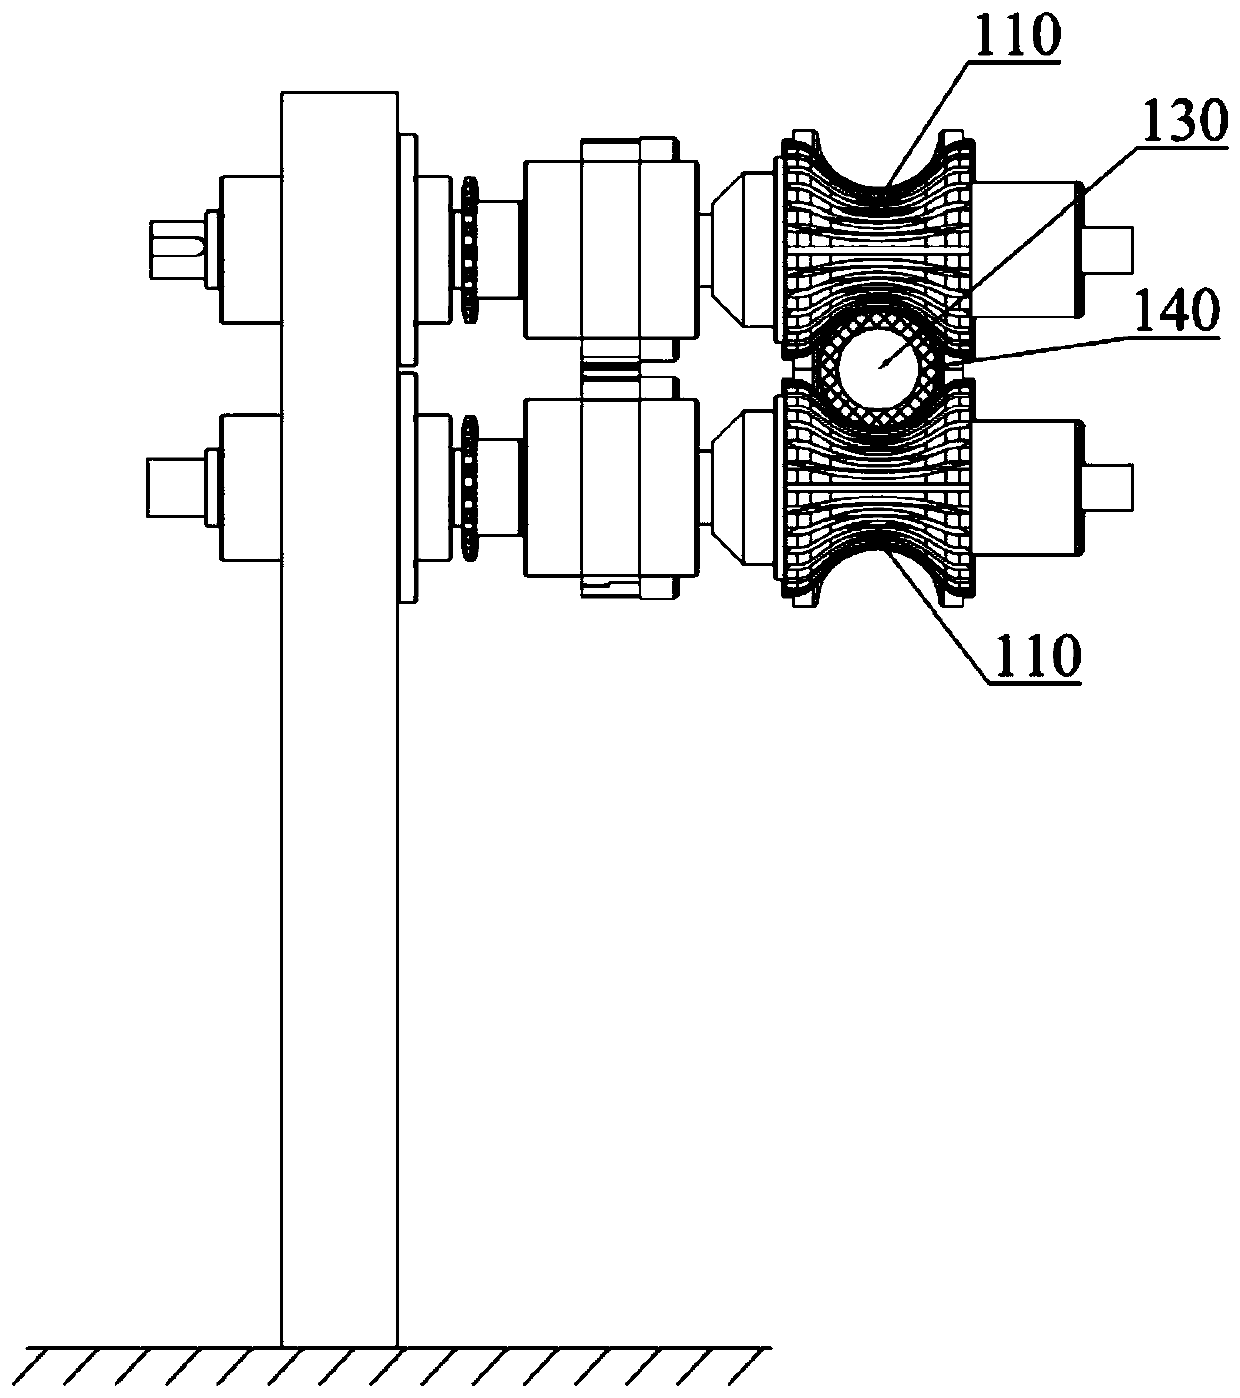 Casing feeding device and casing shrinking device with casing feeding device